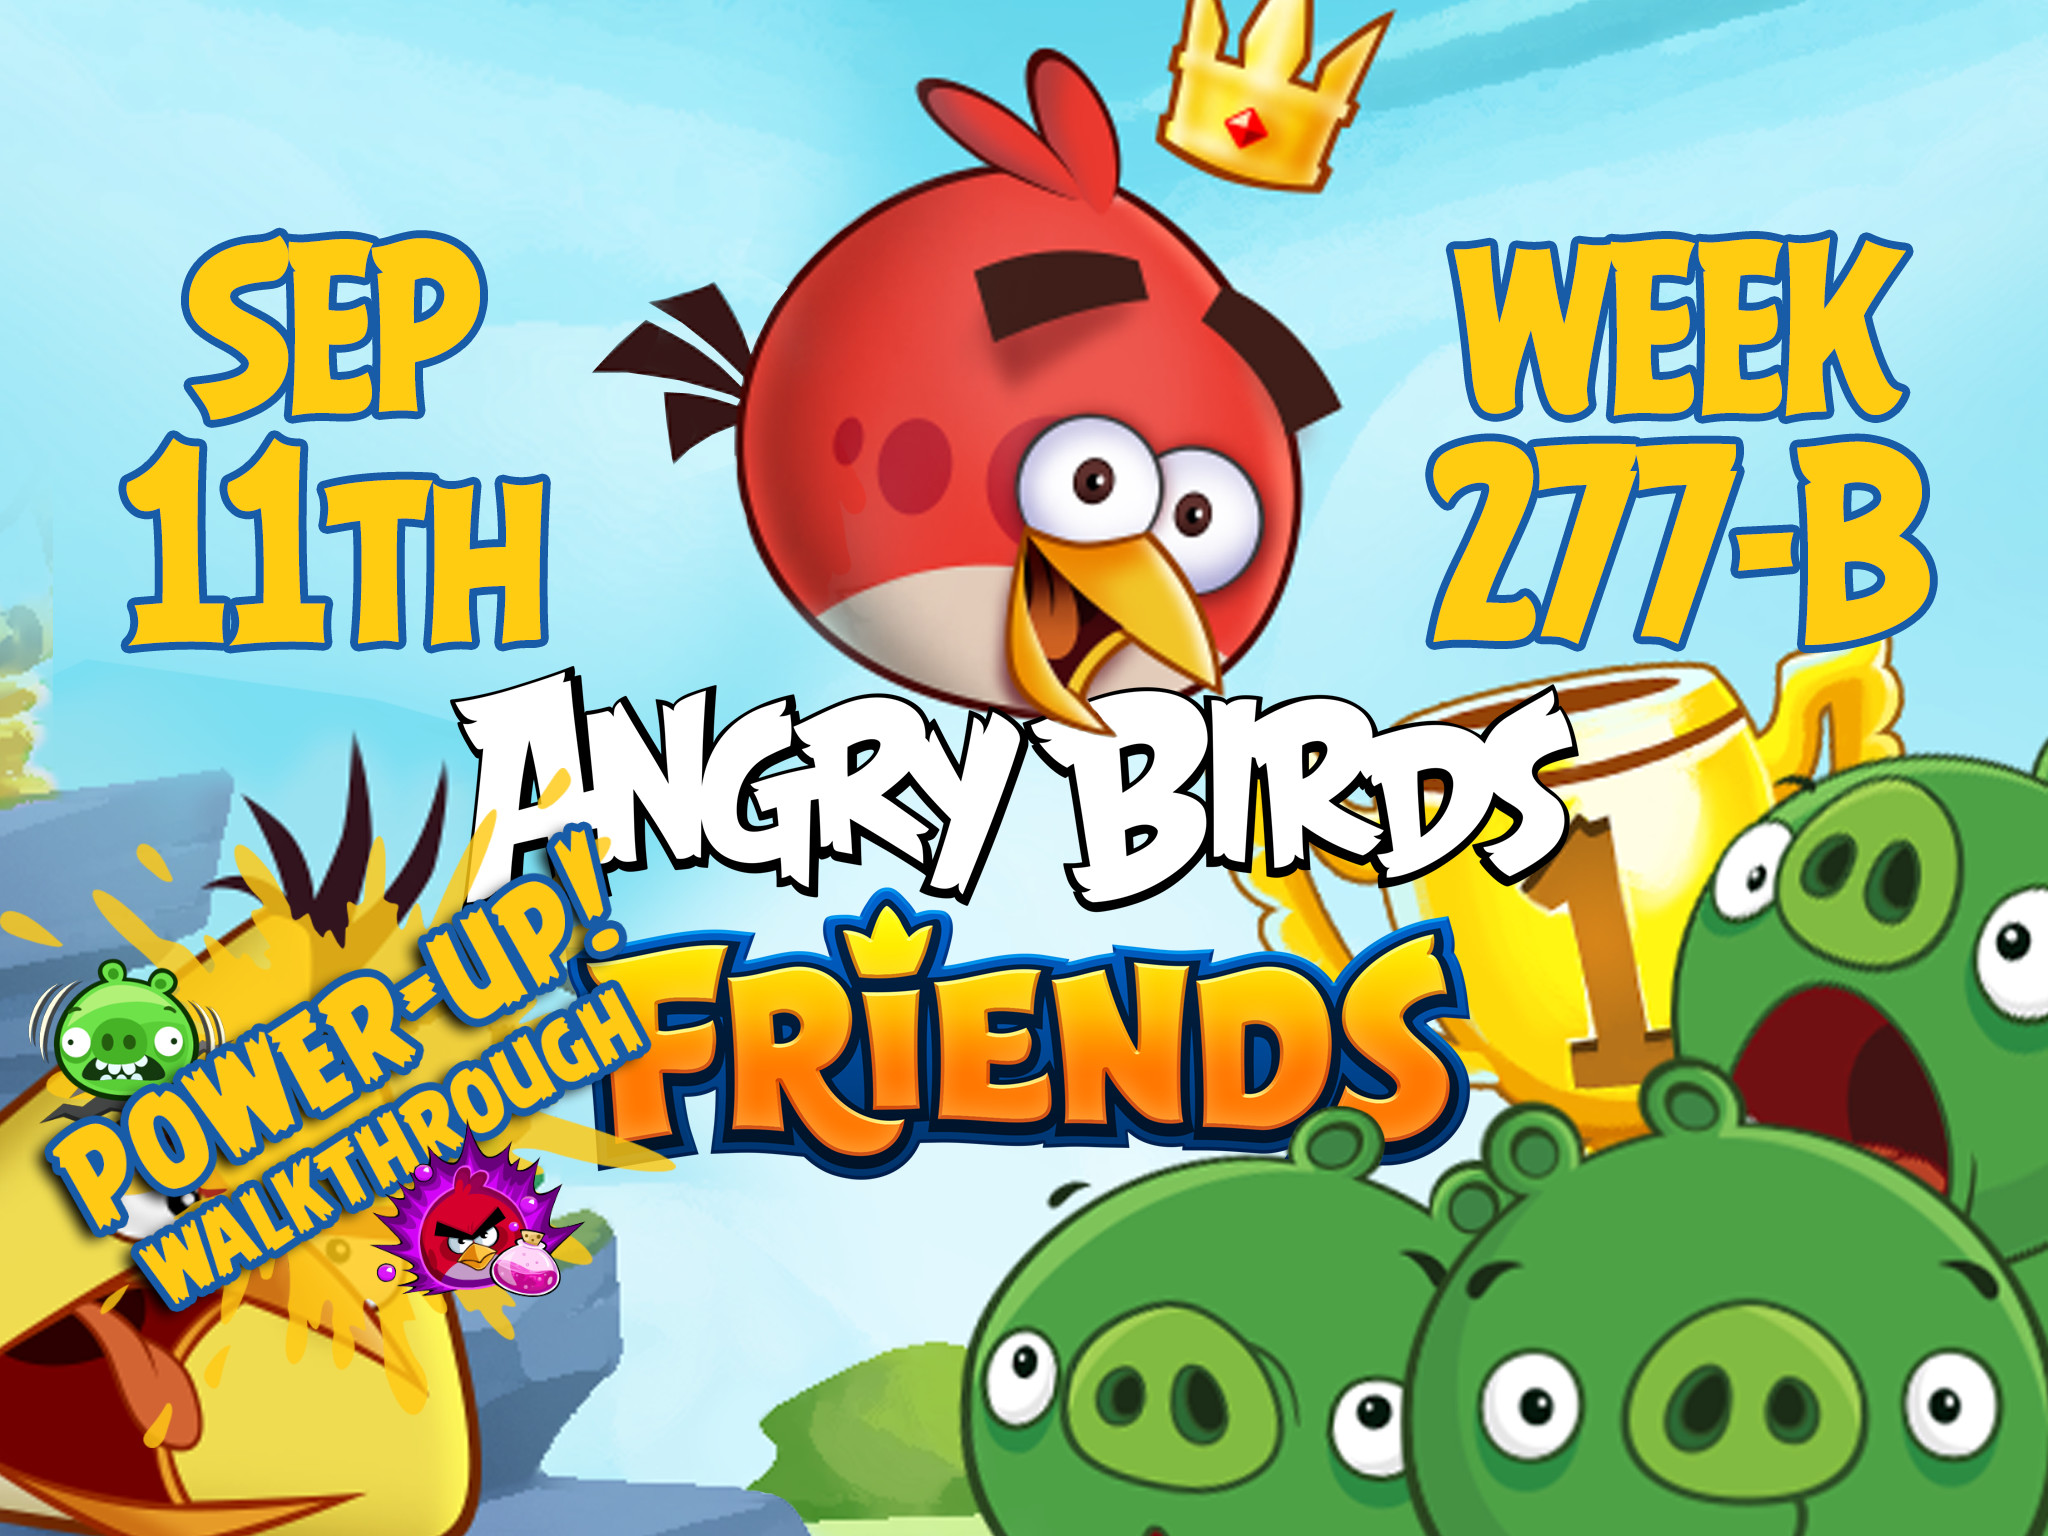 Angry Birds Friends Tournament Week 277-B Feature Image PU